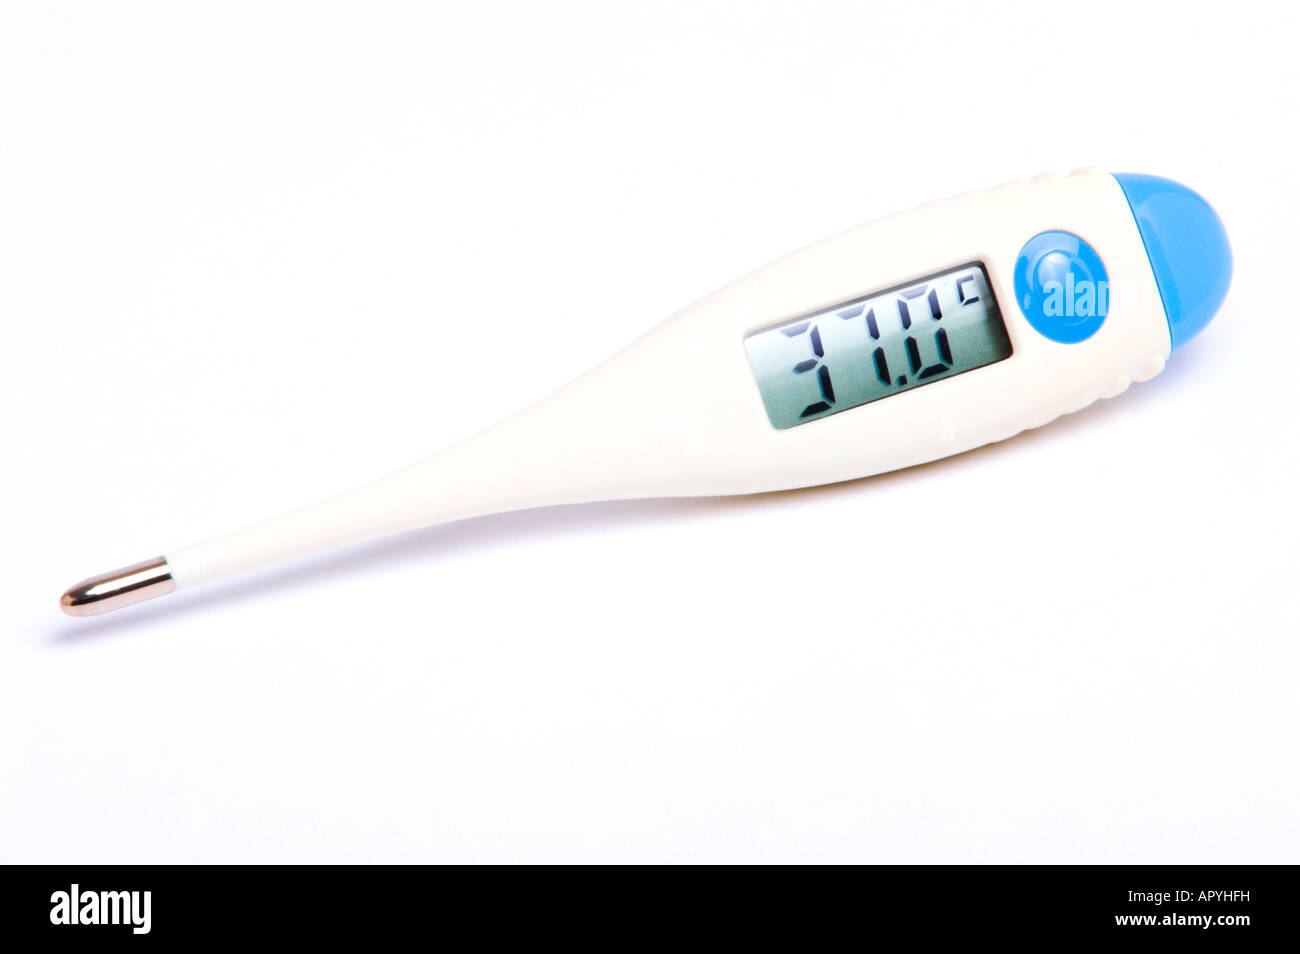 digital thermometer displaying 37 degrees celsius Stock Photo